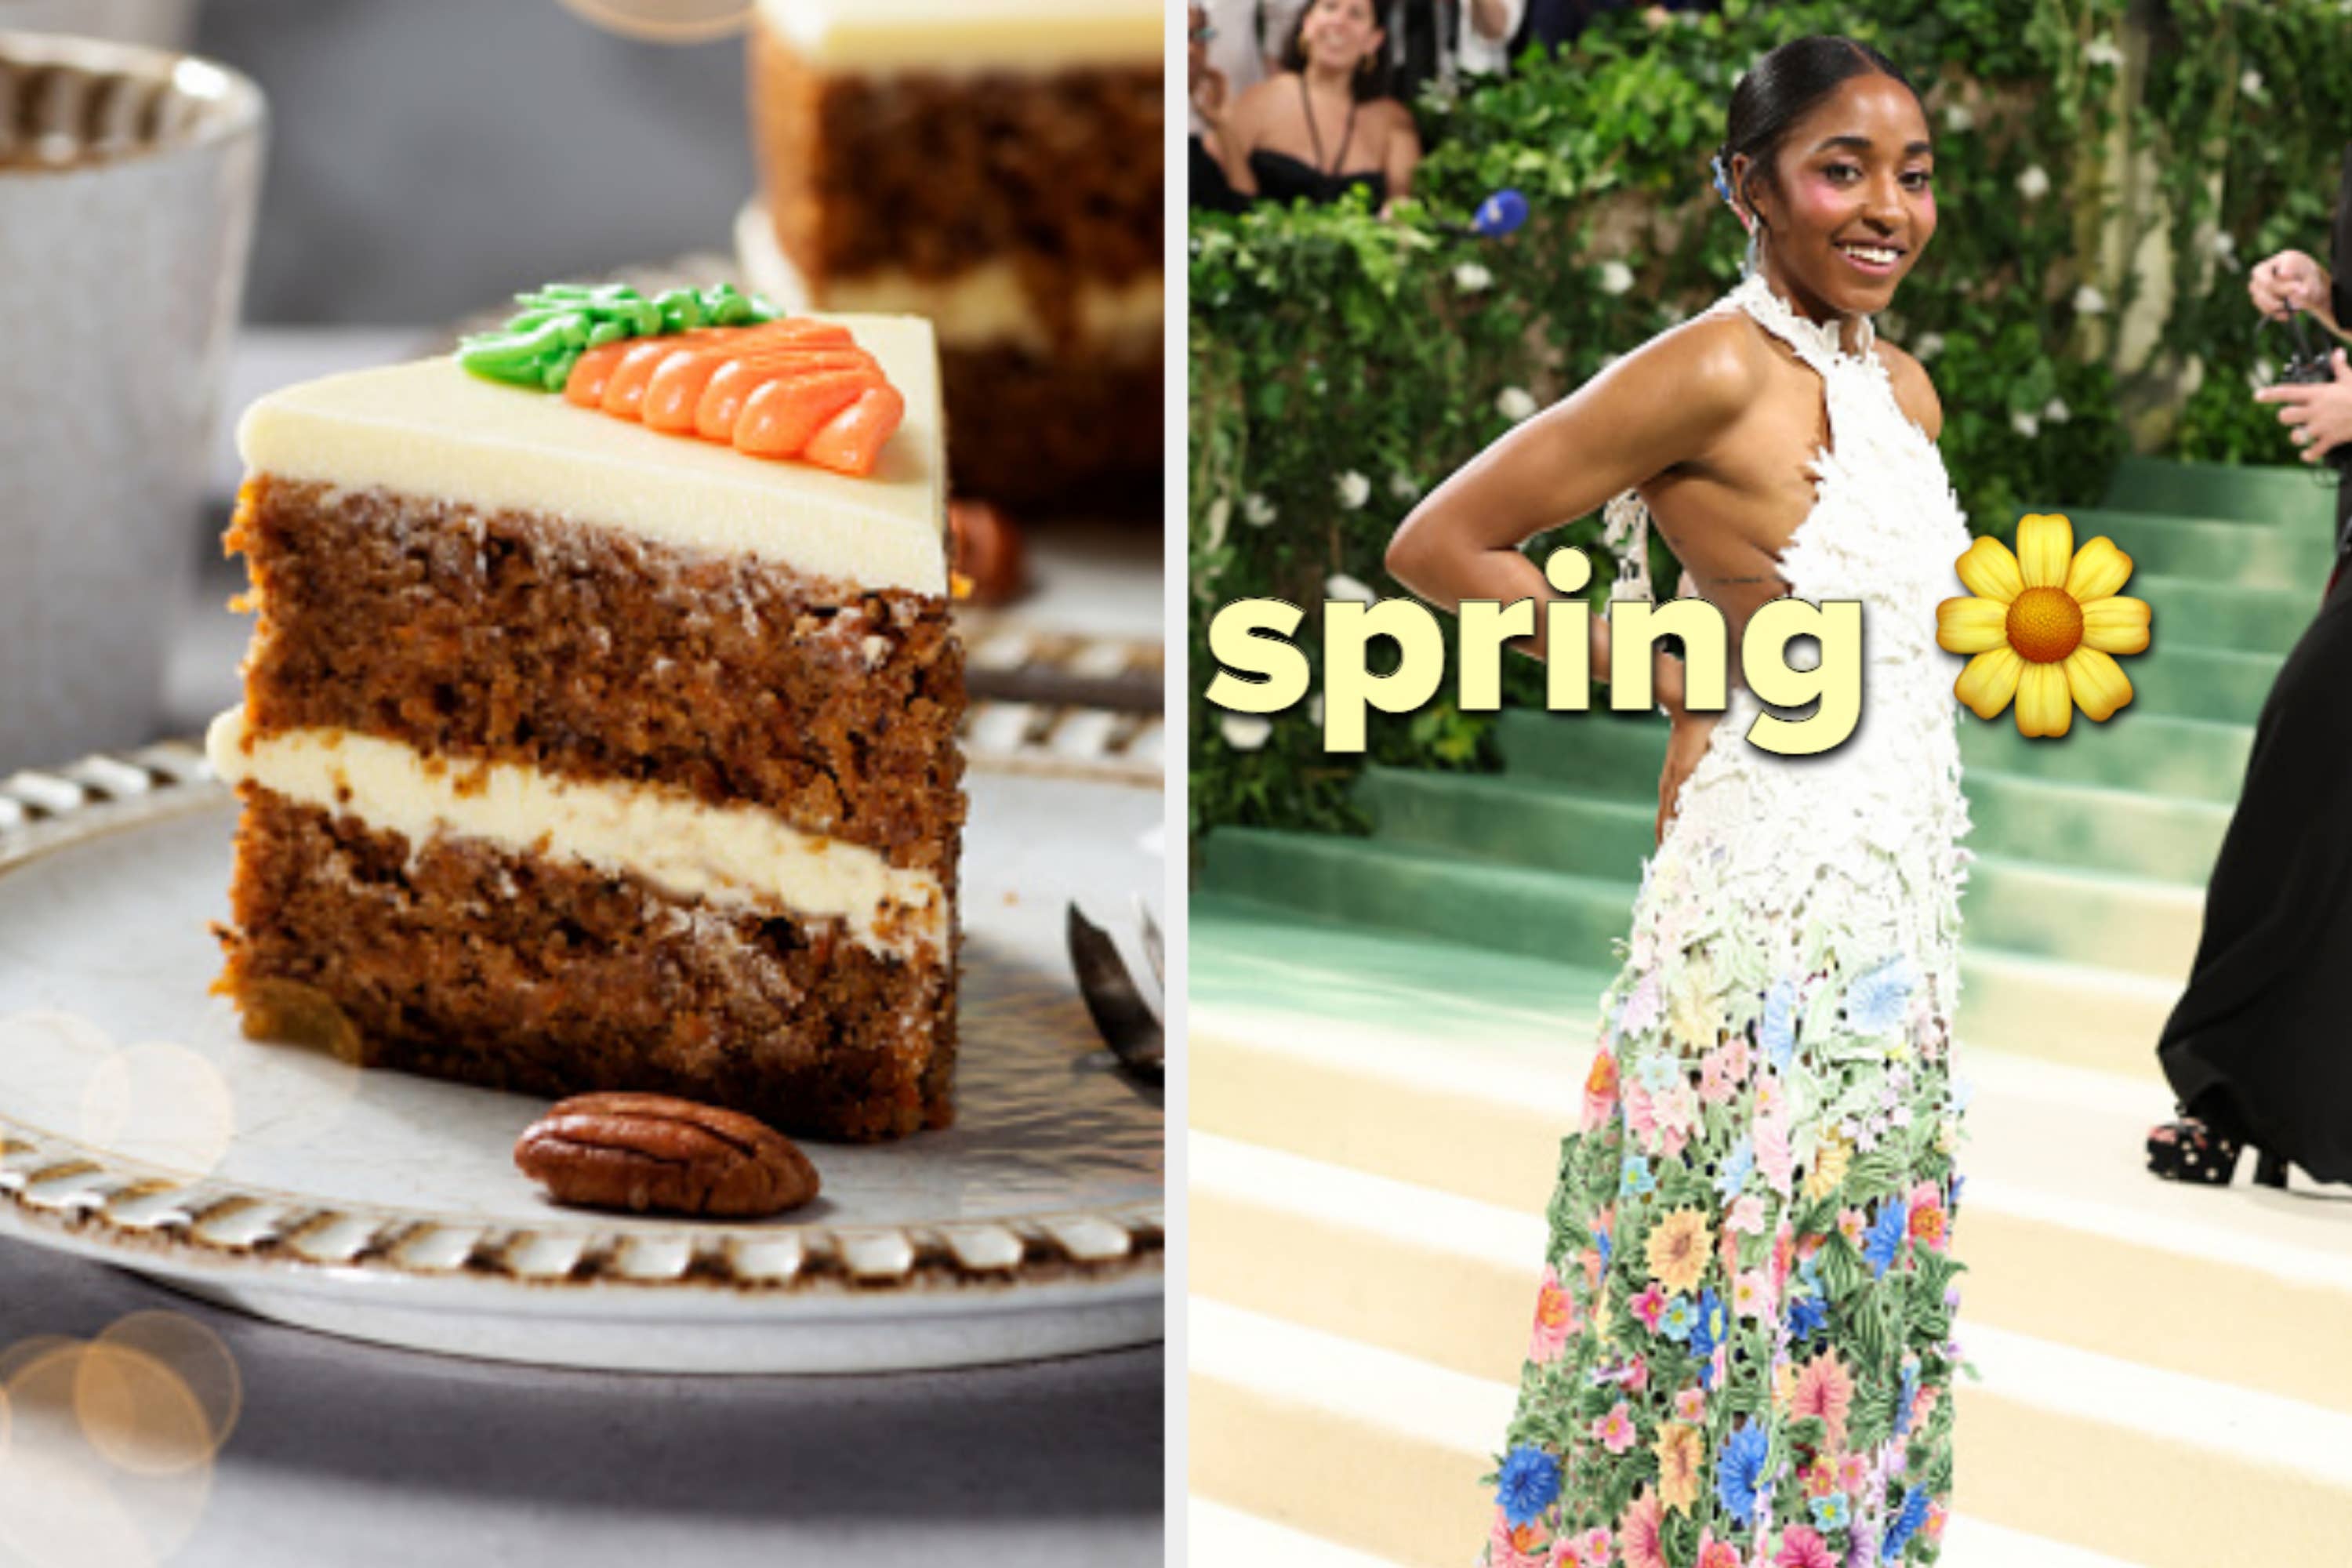 Left: A carrot cake with cream cheese frosting. Right: A woman in a floral dress at an event